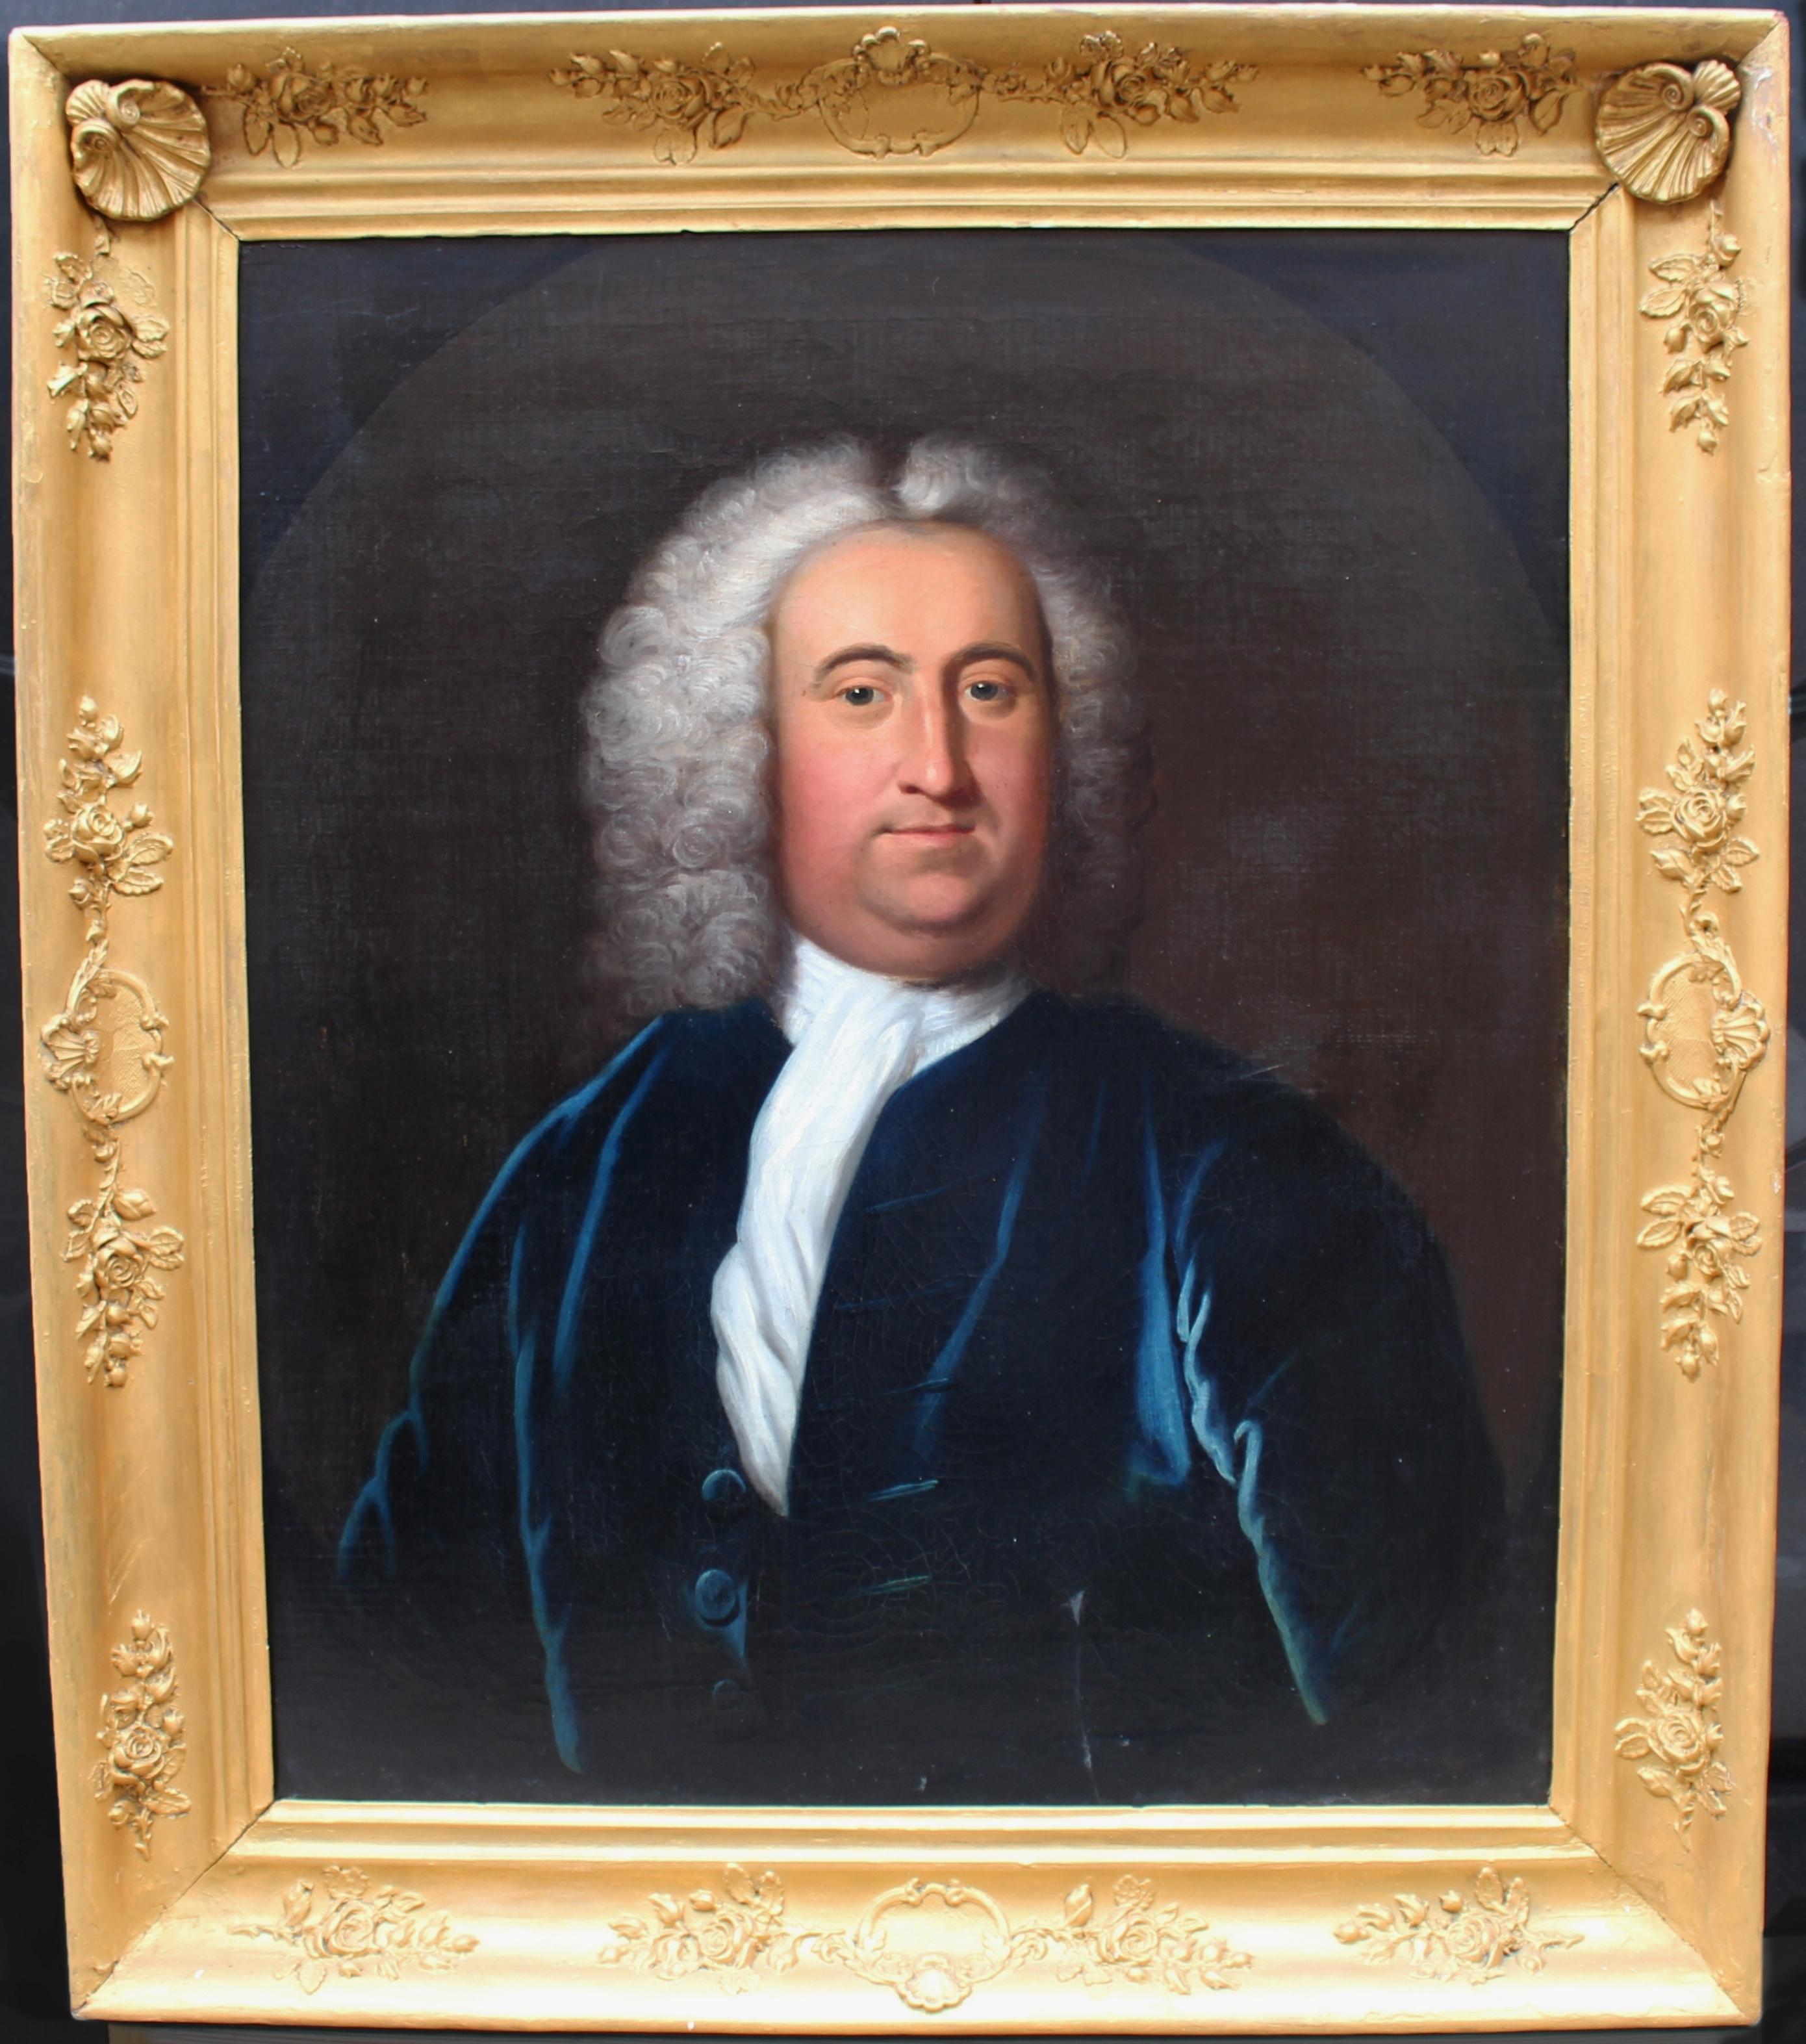 English 18th c. portrait of a gentleman oil on canvas


Period 18th century

Medium Oil on canvas

Frame 79 x 92 cm / 31 x 36 in

Subject Portrait

Some craquelure commensurate with age and a few scuffs to canvas. Set in original period